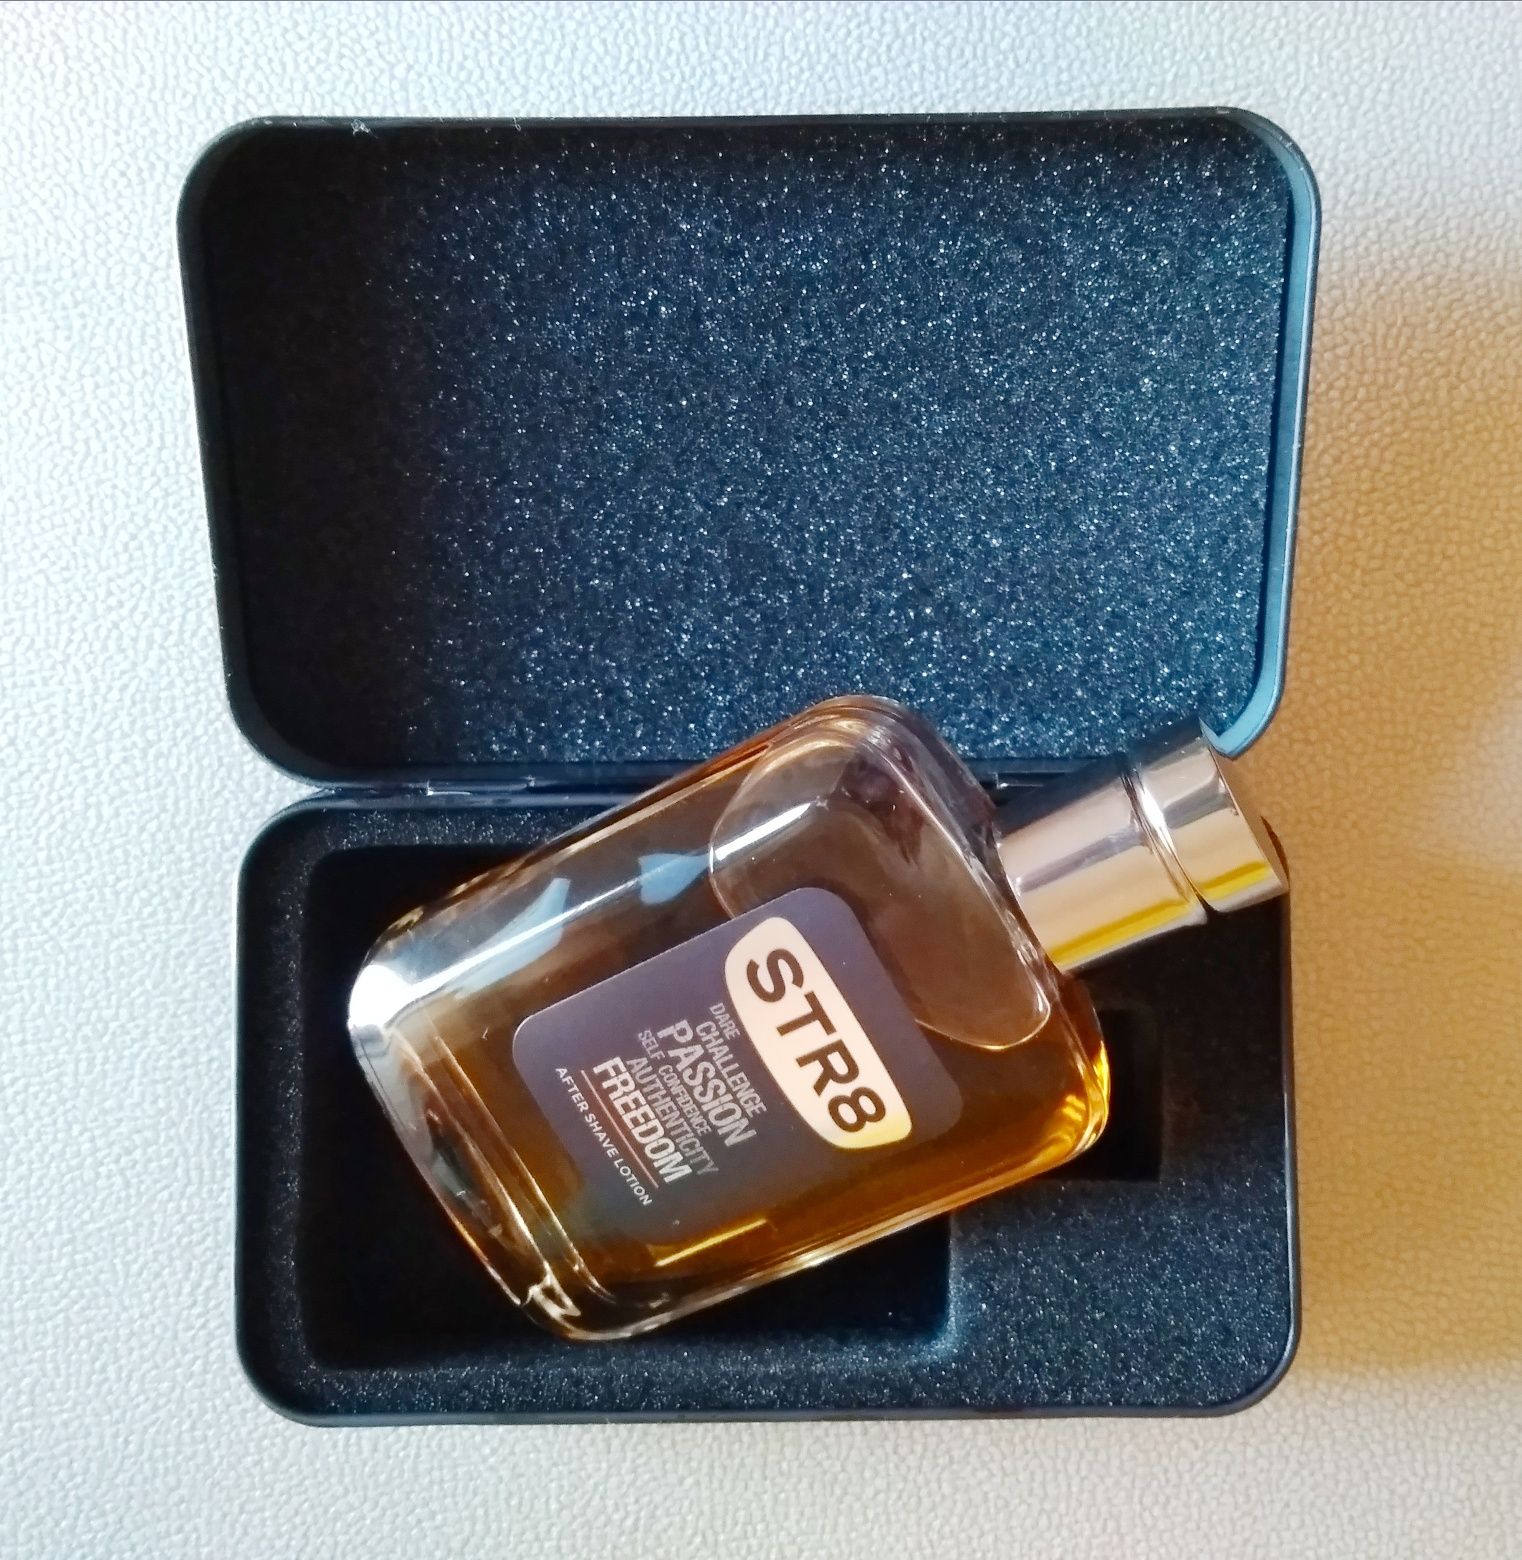 Lote After Shave + perfume